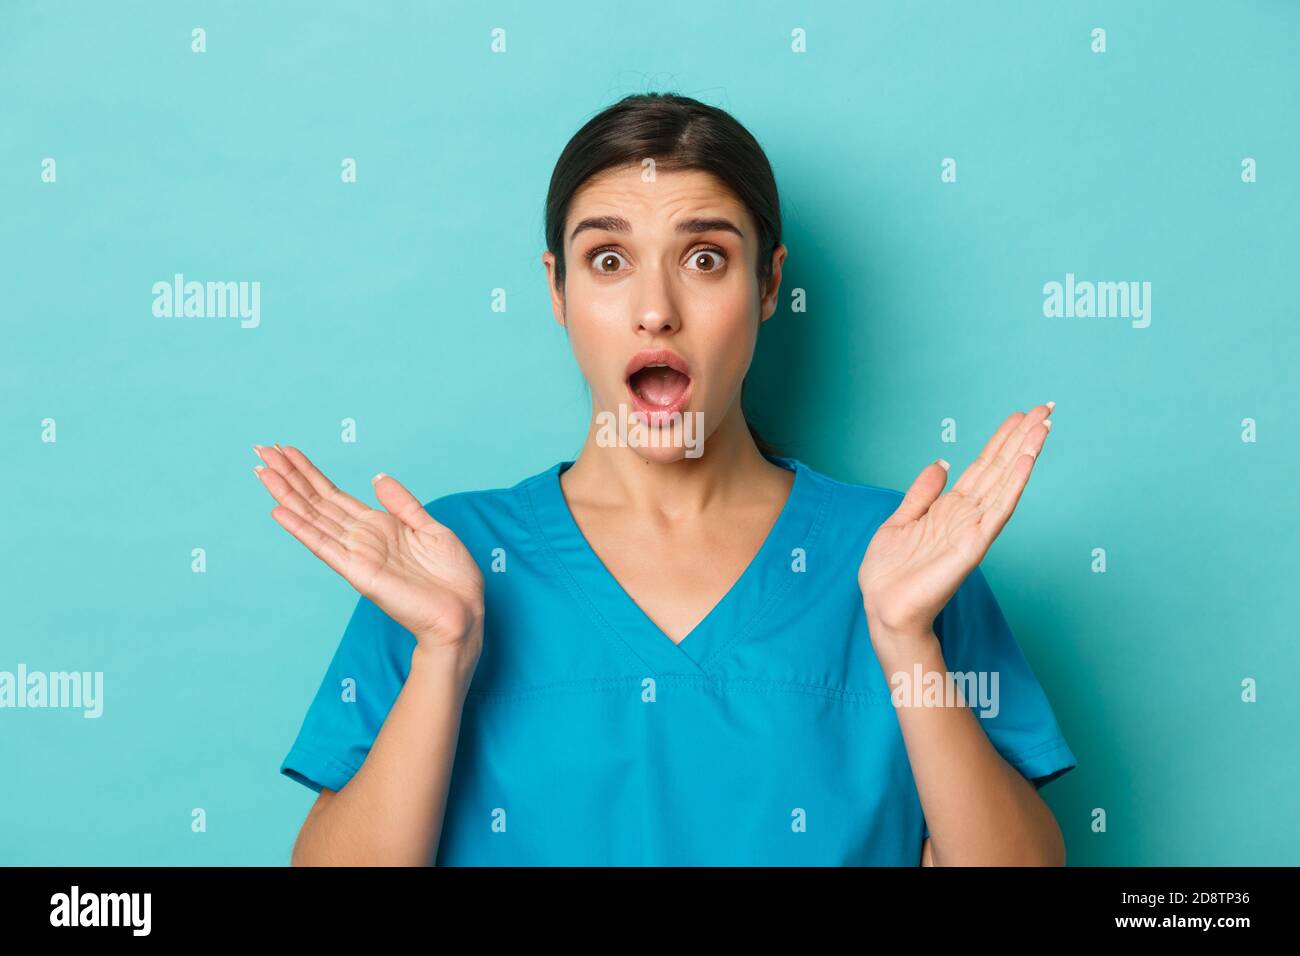 Coronavirus, social distancing and health concept. Close-up of alarmed and anxious female doctor, spread hands sideways and drop jaw, looking worried Stock Photo